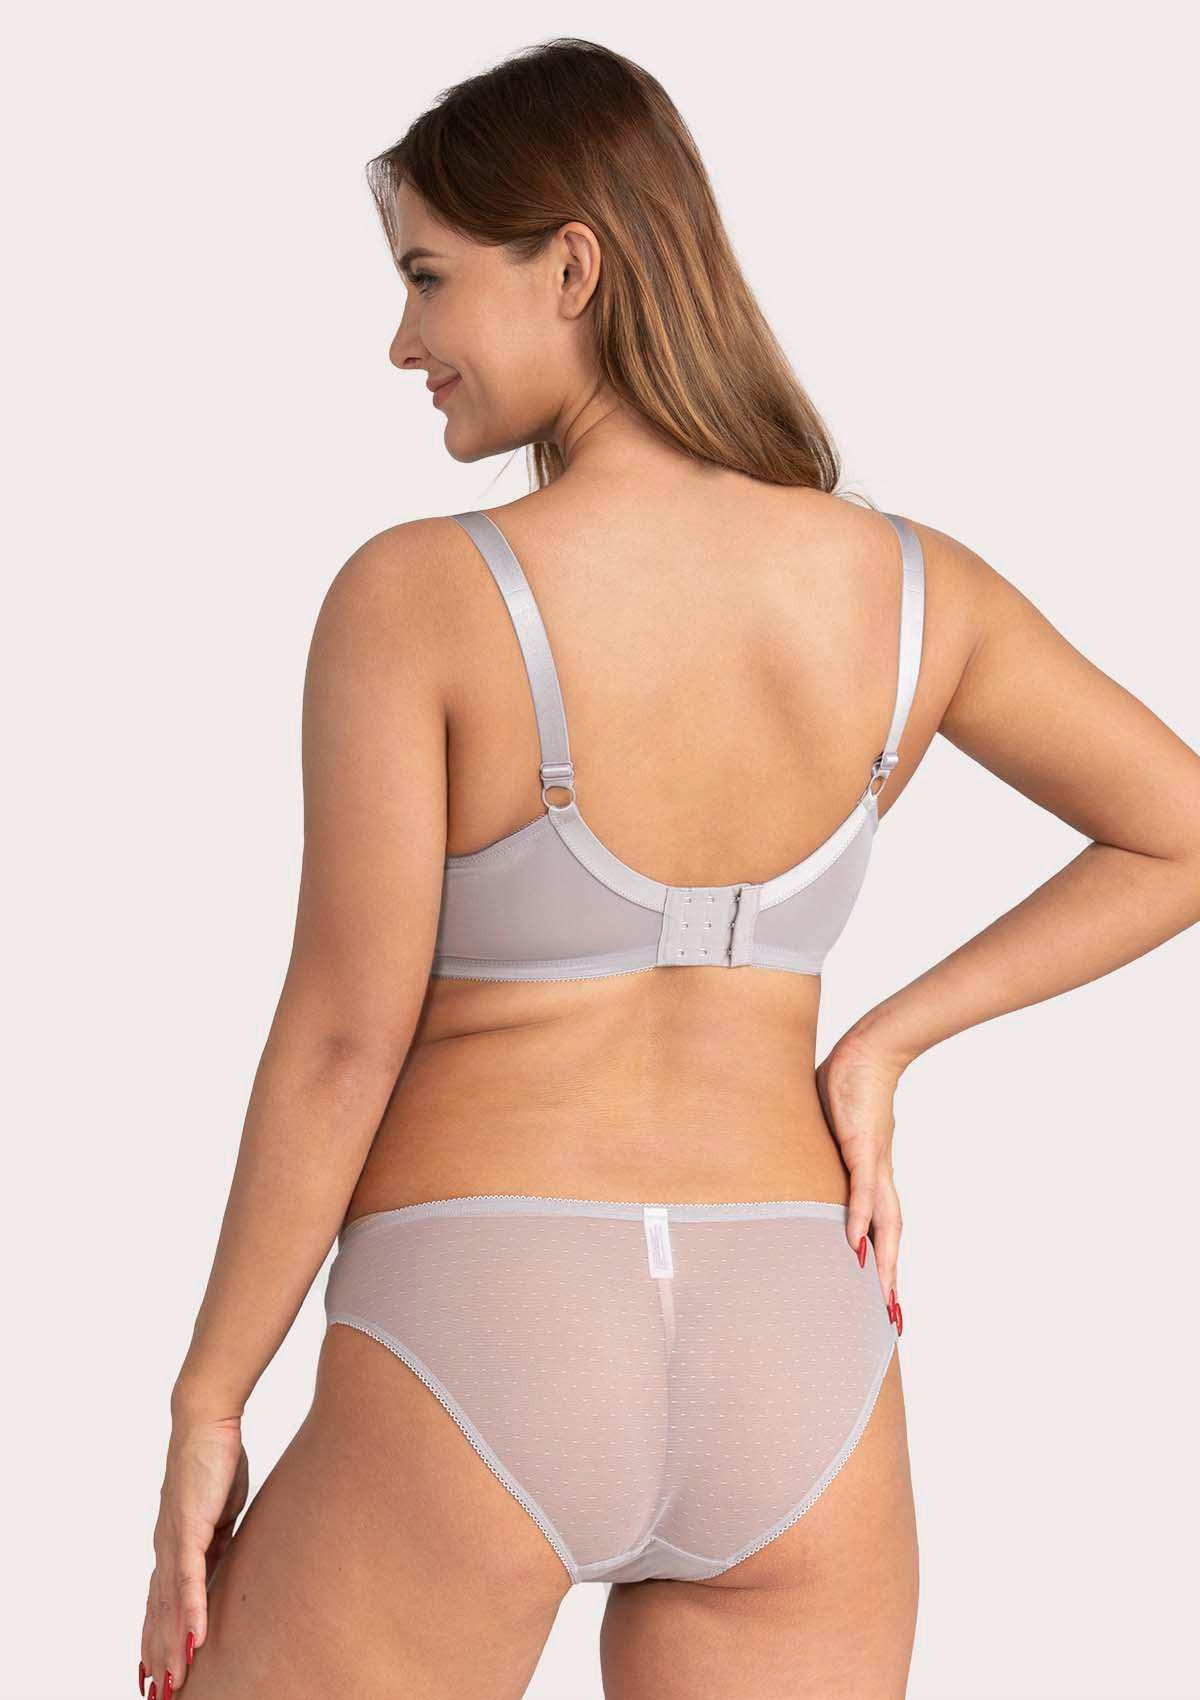 HSIA Enchante Lace Bra And Panties Set: Back Support Bra For Posture - Light Gray / 34 / DDD/F